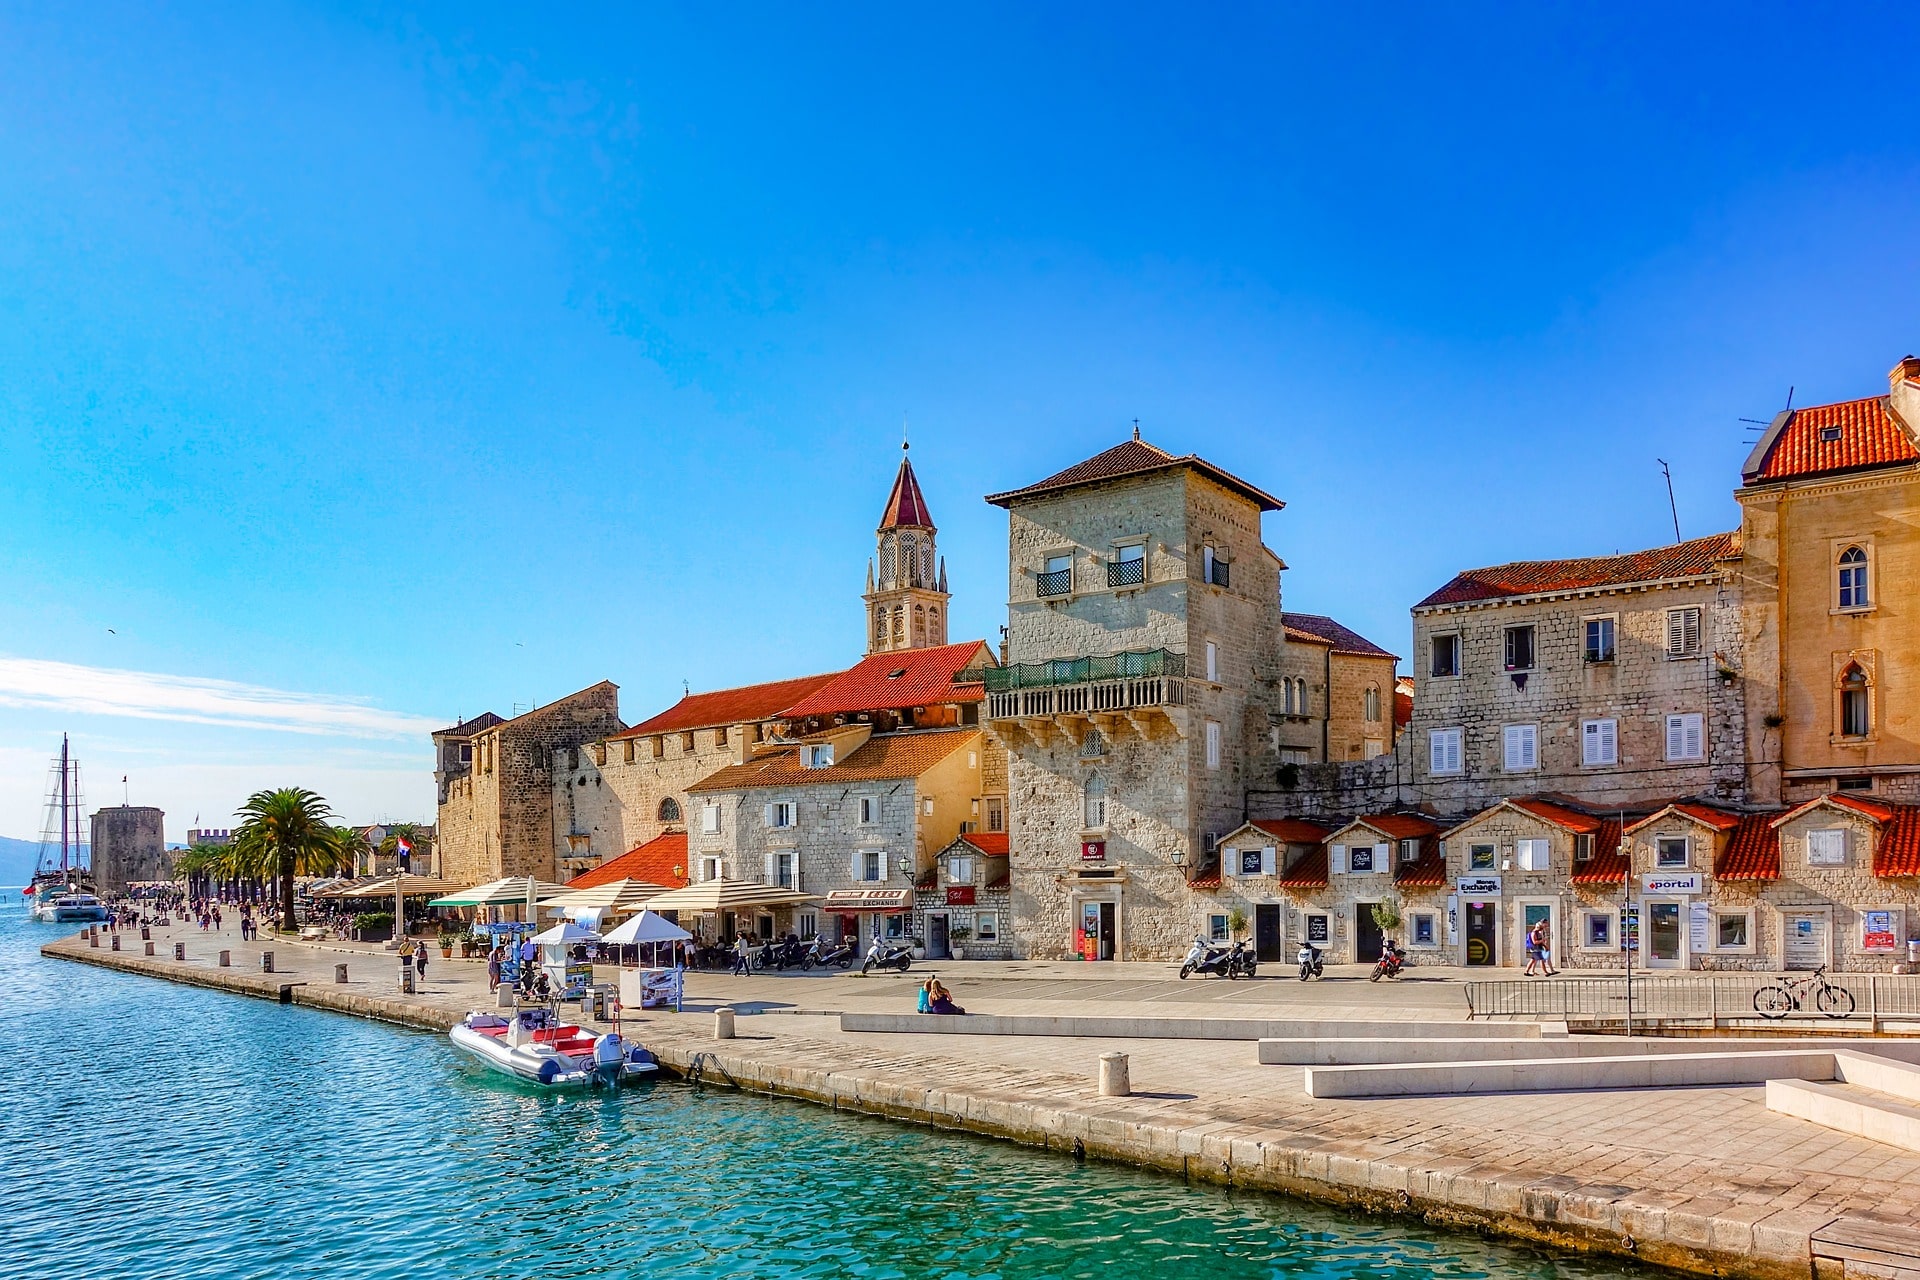 Trogir is one of the best places to visit in Croatia